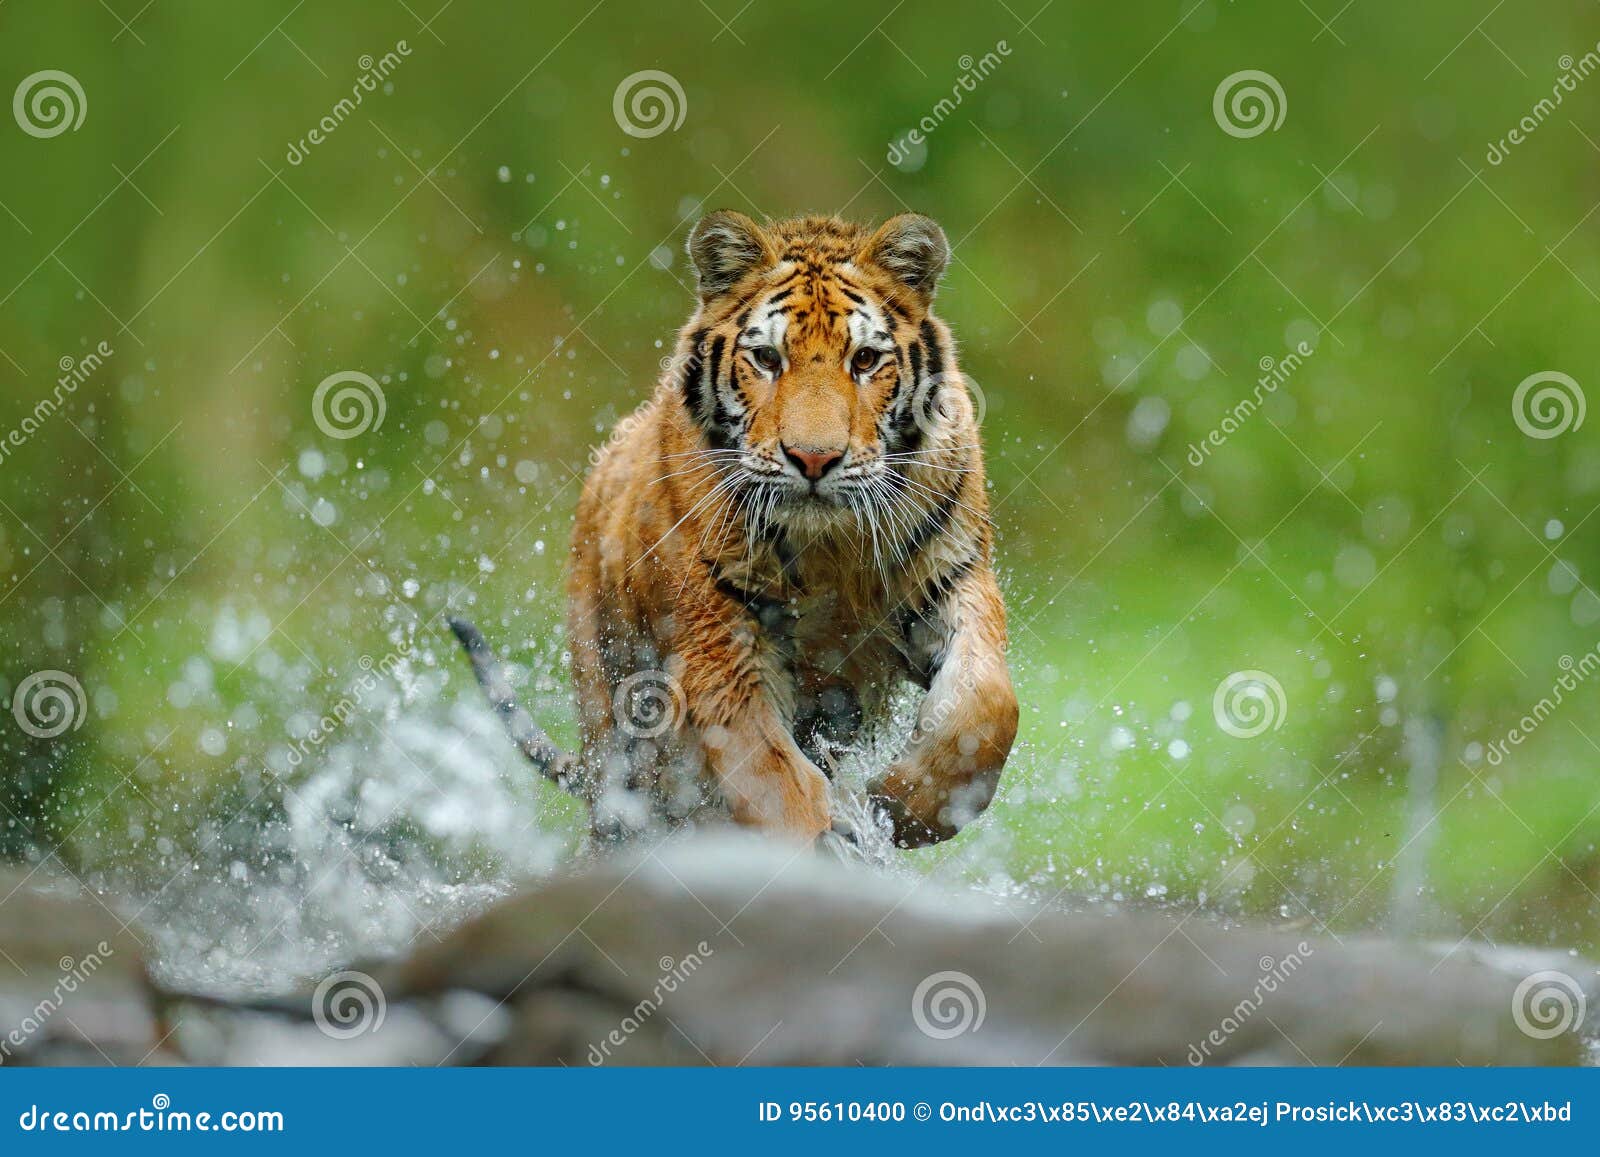 tiger with splash river water. action wildlife scene with wild cat in nature habitat. tiger running in the water. danger animal, t